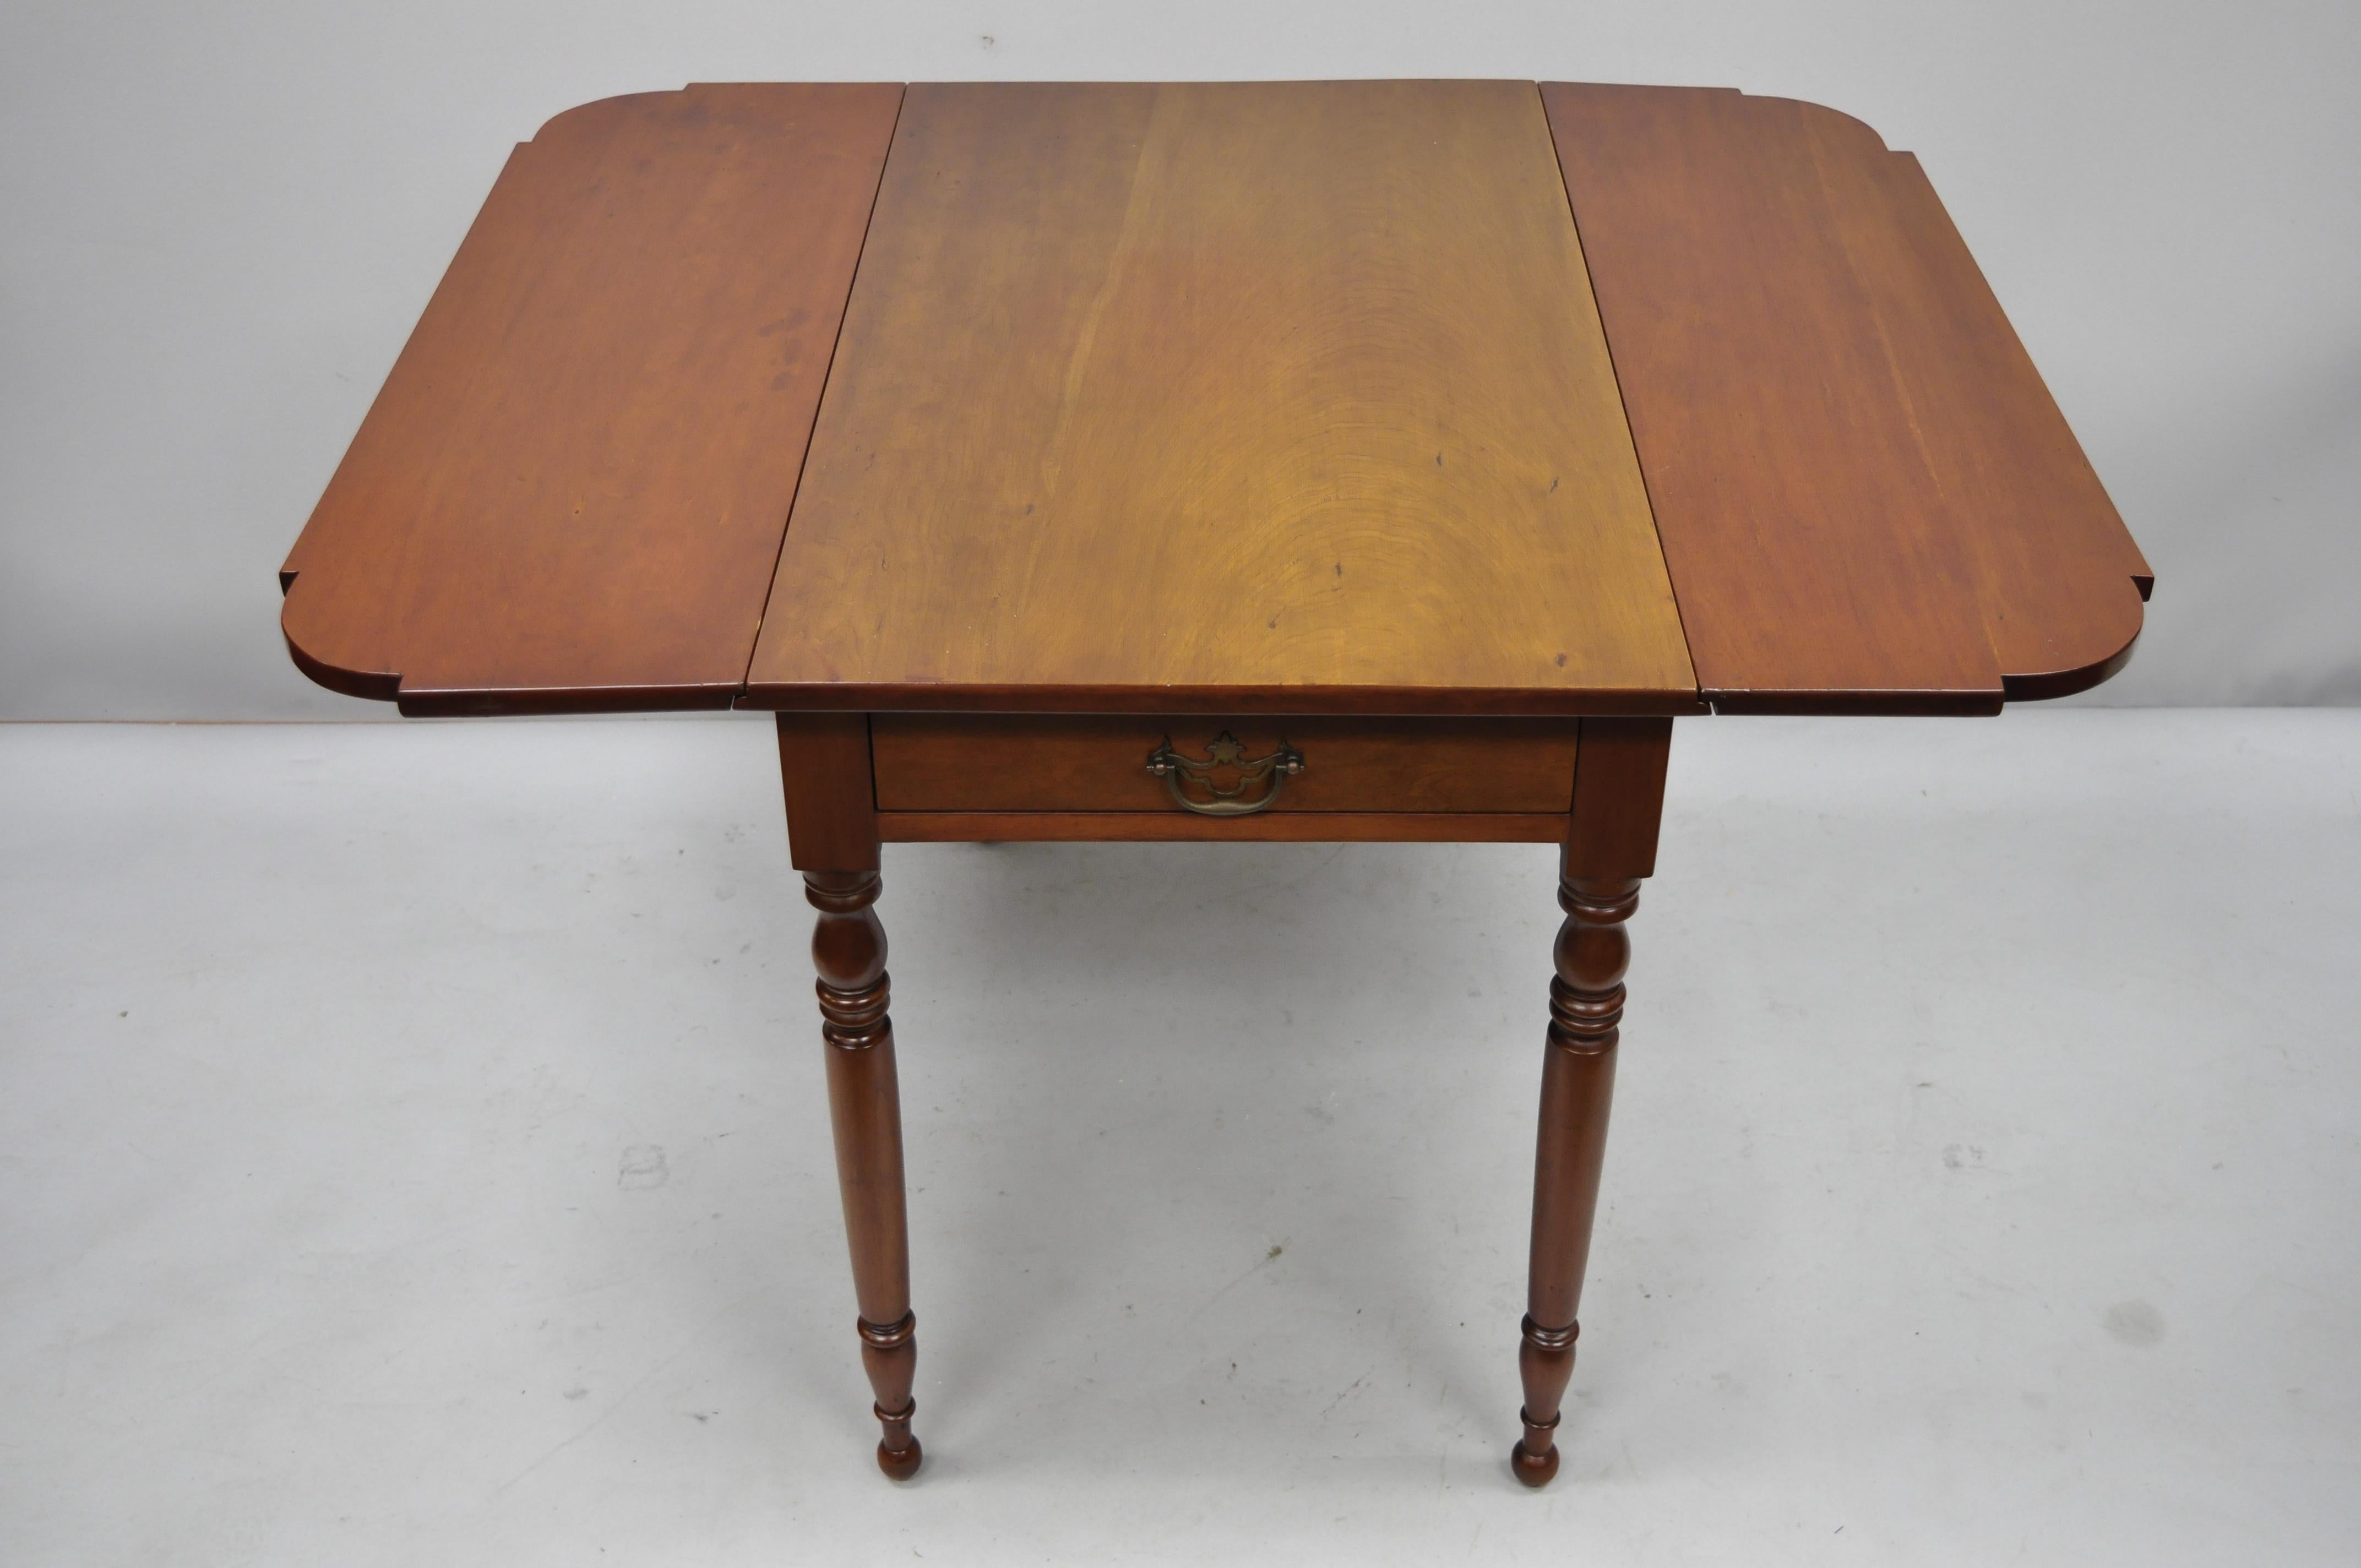 19th Century Antique Cherry Wood American Colonial Drop Leaf Pembroke Table In Good Condition For Sale In Philadelphia, PA